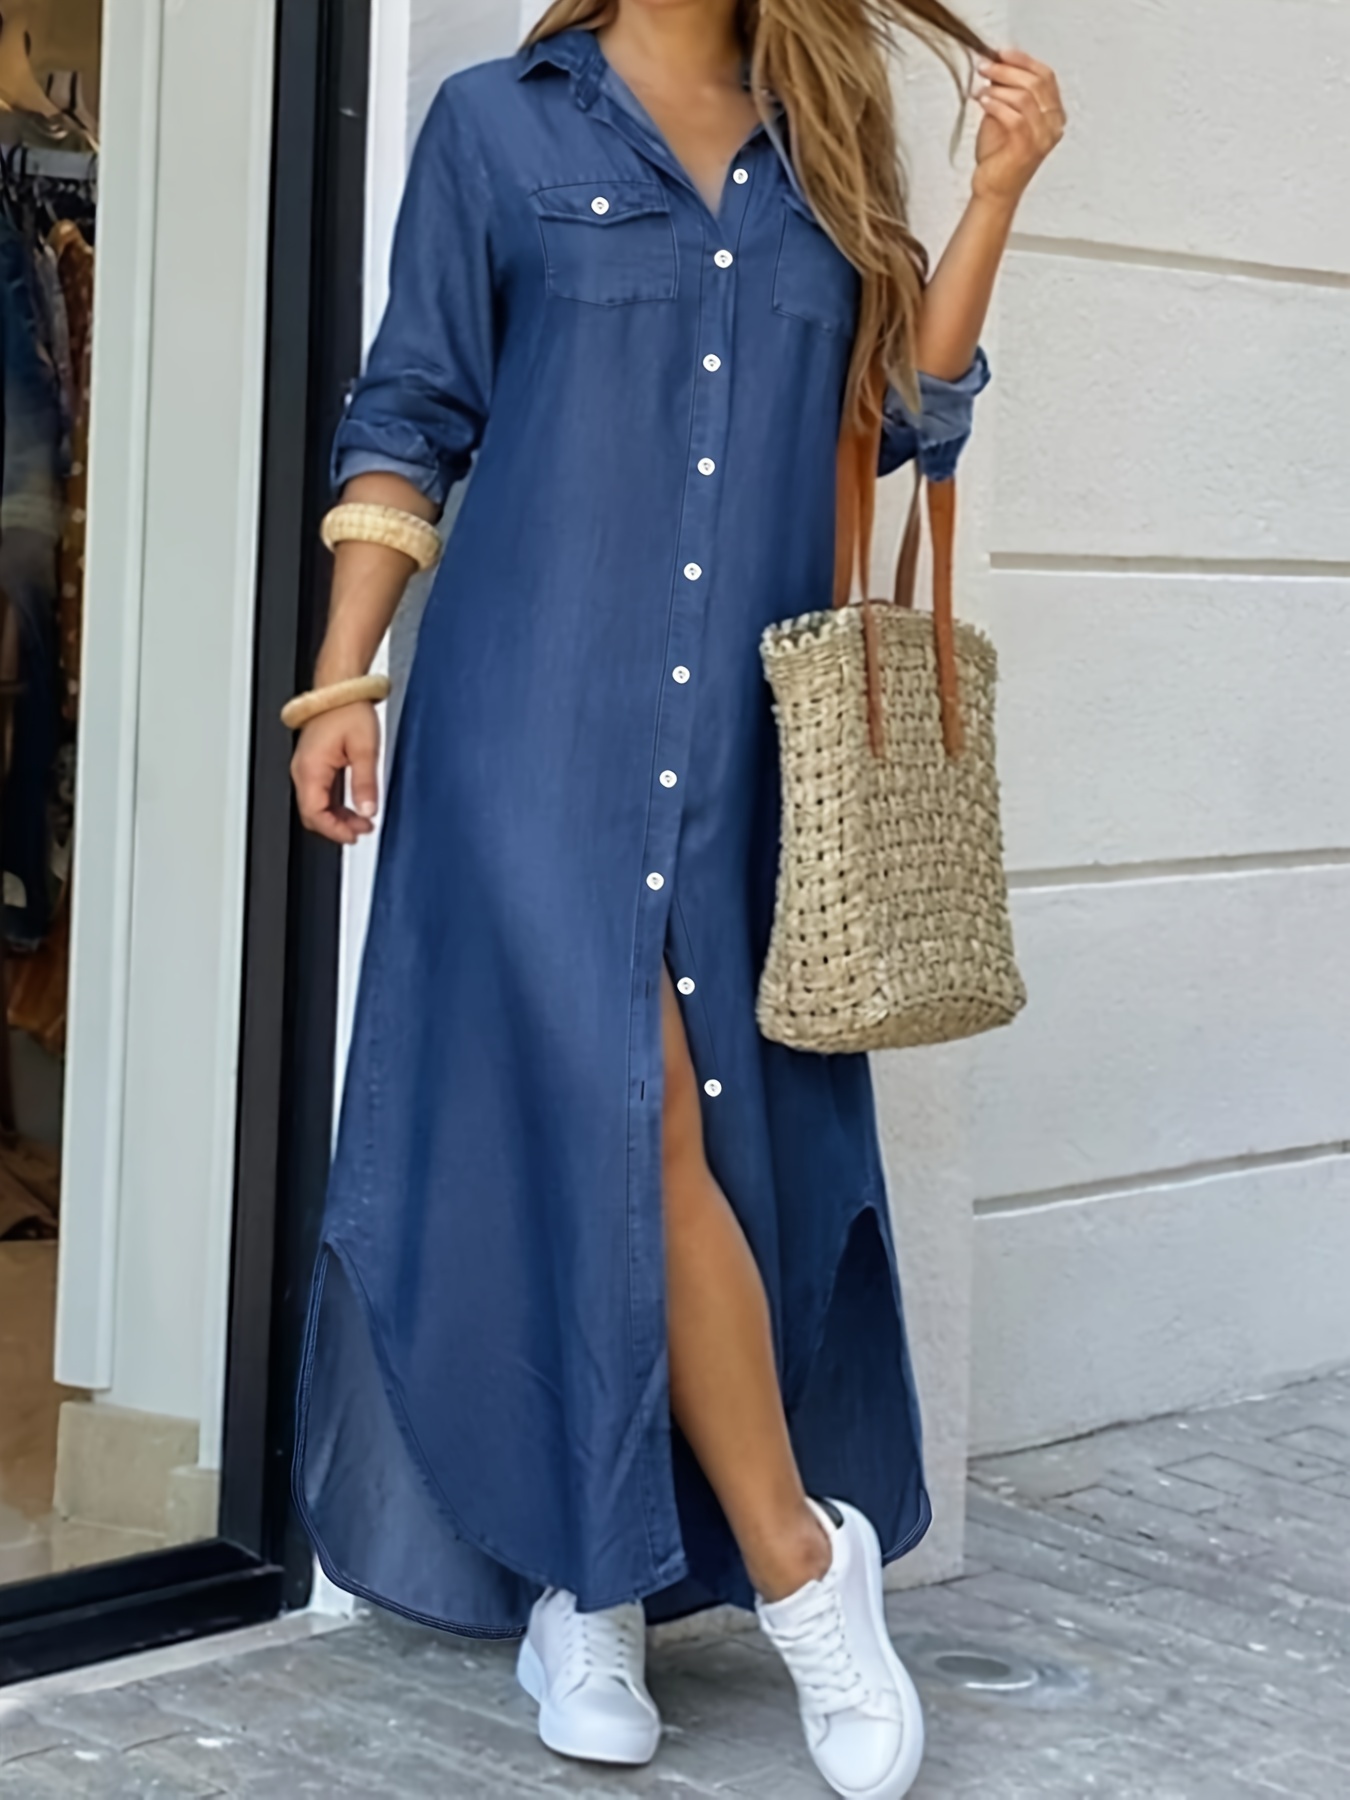 2021 Womens Summer Denim Maxi Dress With Button Bootstrap 5 Up Pocket, Blue  Print, Short Sleeves, Plus Size Option, Casual And Long Vestidos 5XL Q0712  From Yanqin03, $12.53